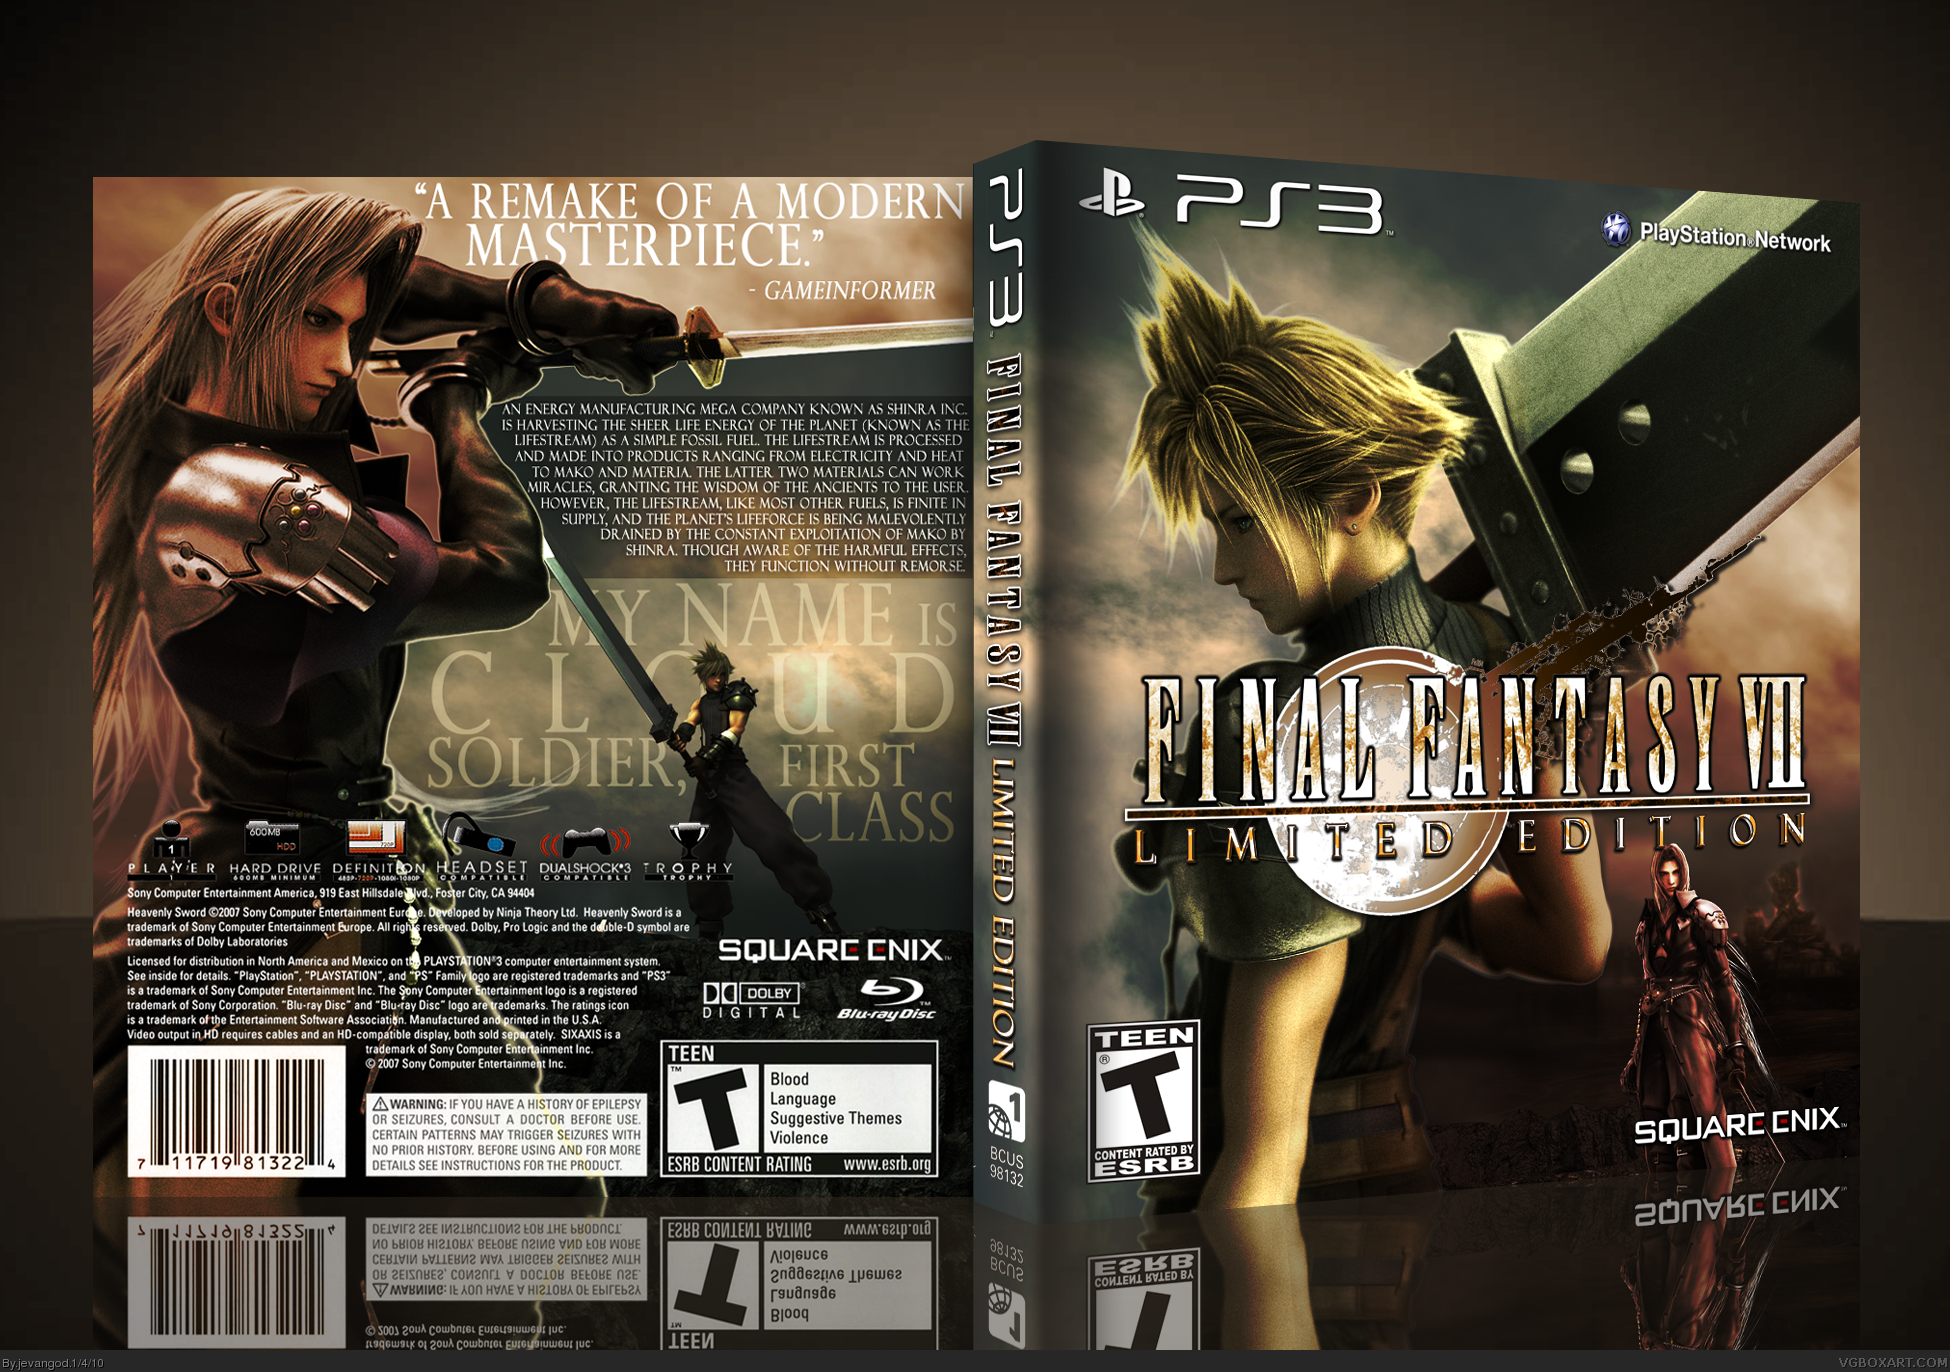 Final Fantasy VII Limited Edition box cover